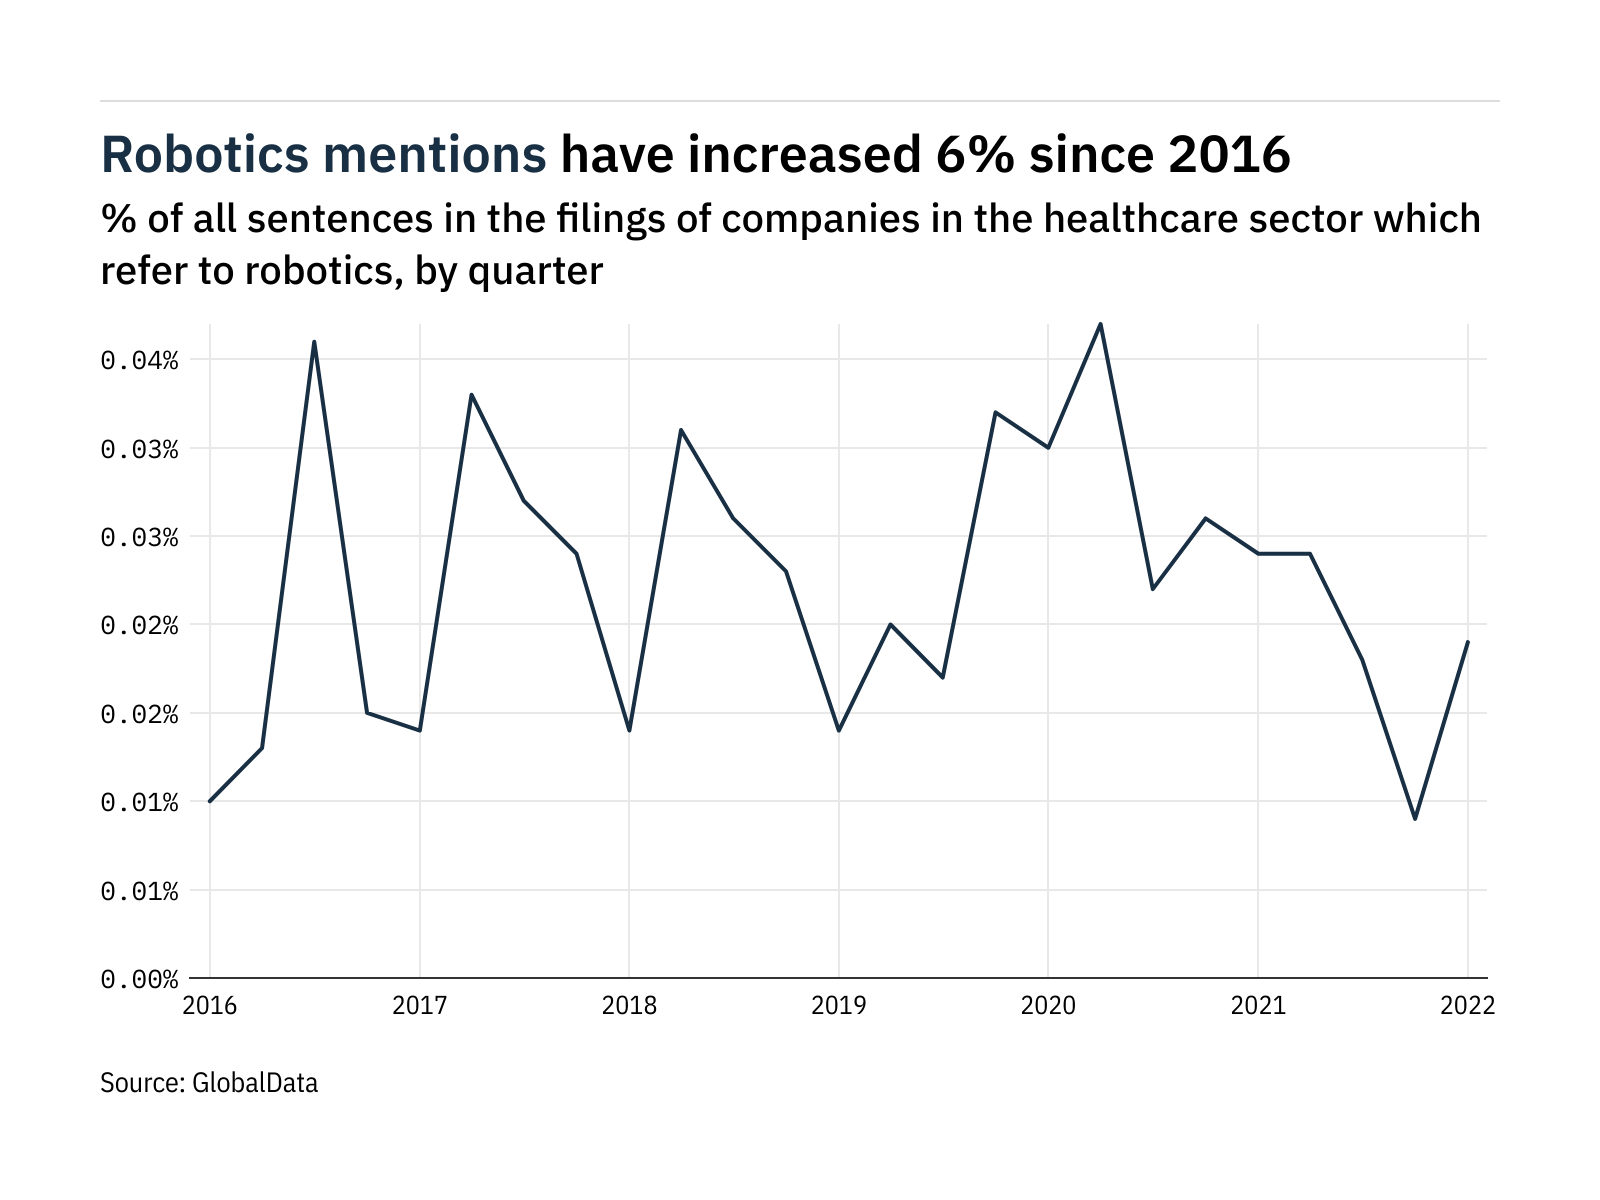 Filings buzz in healthcare: 111% increase in robotics mentions in Q1 of 2022